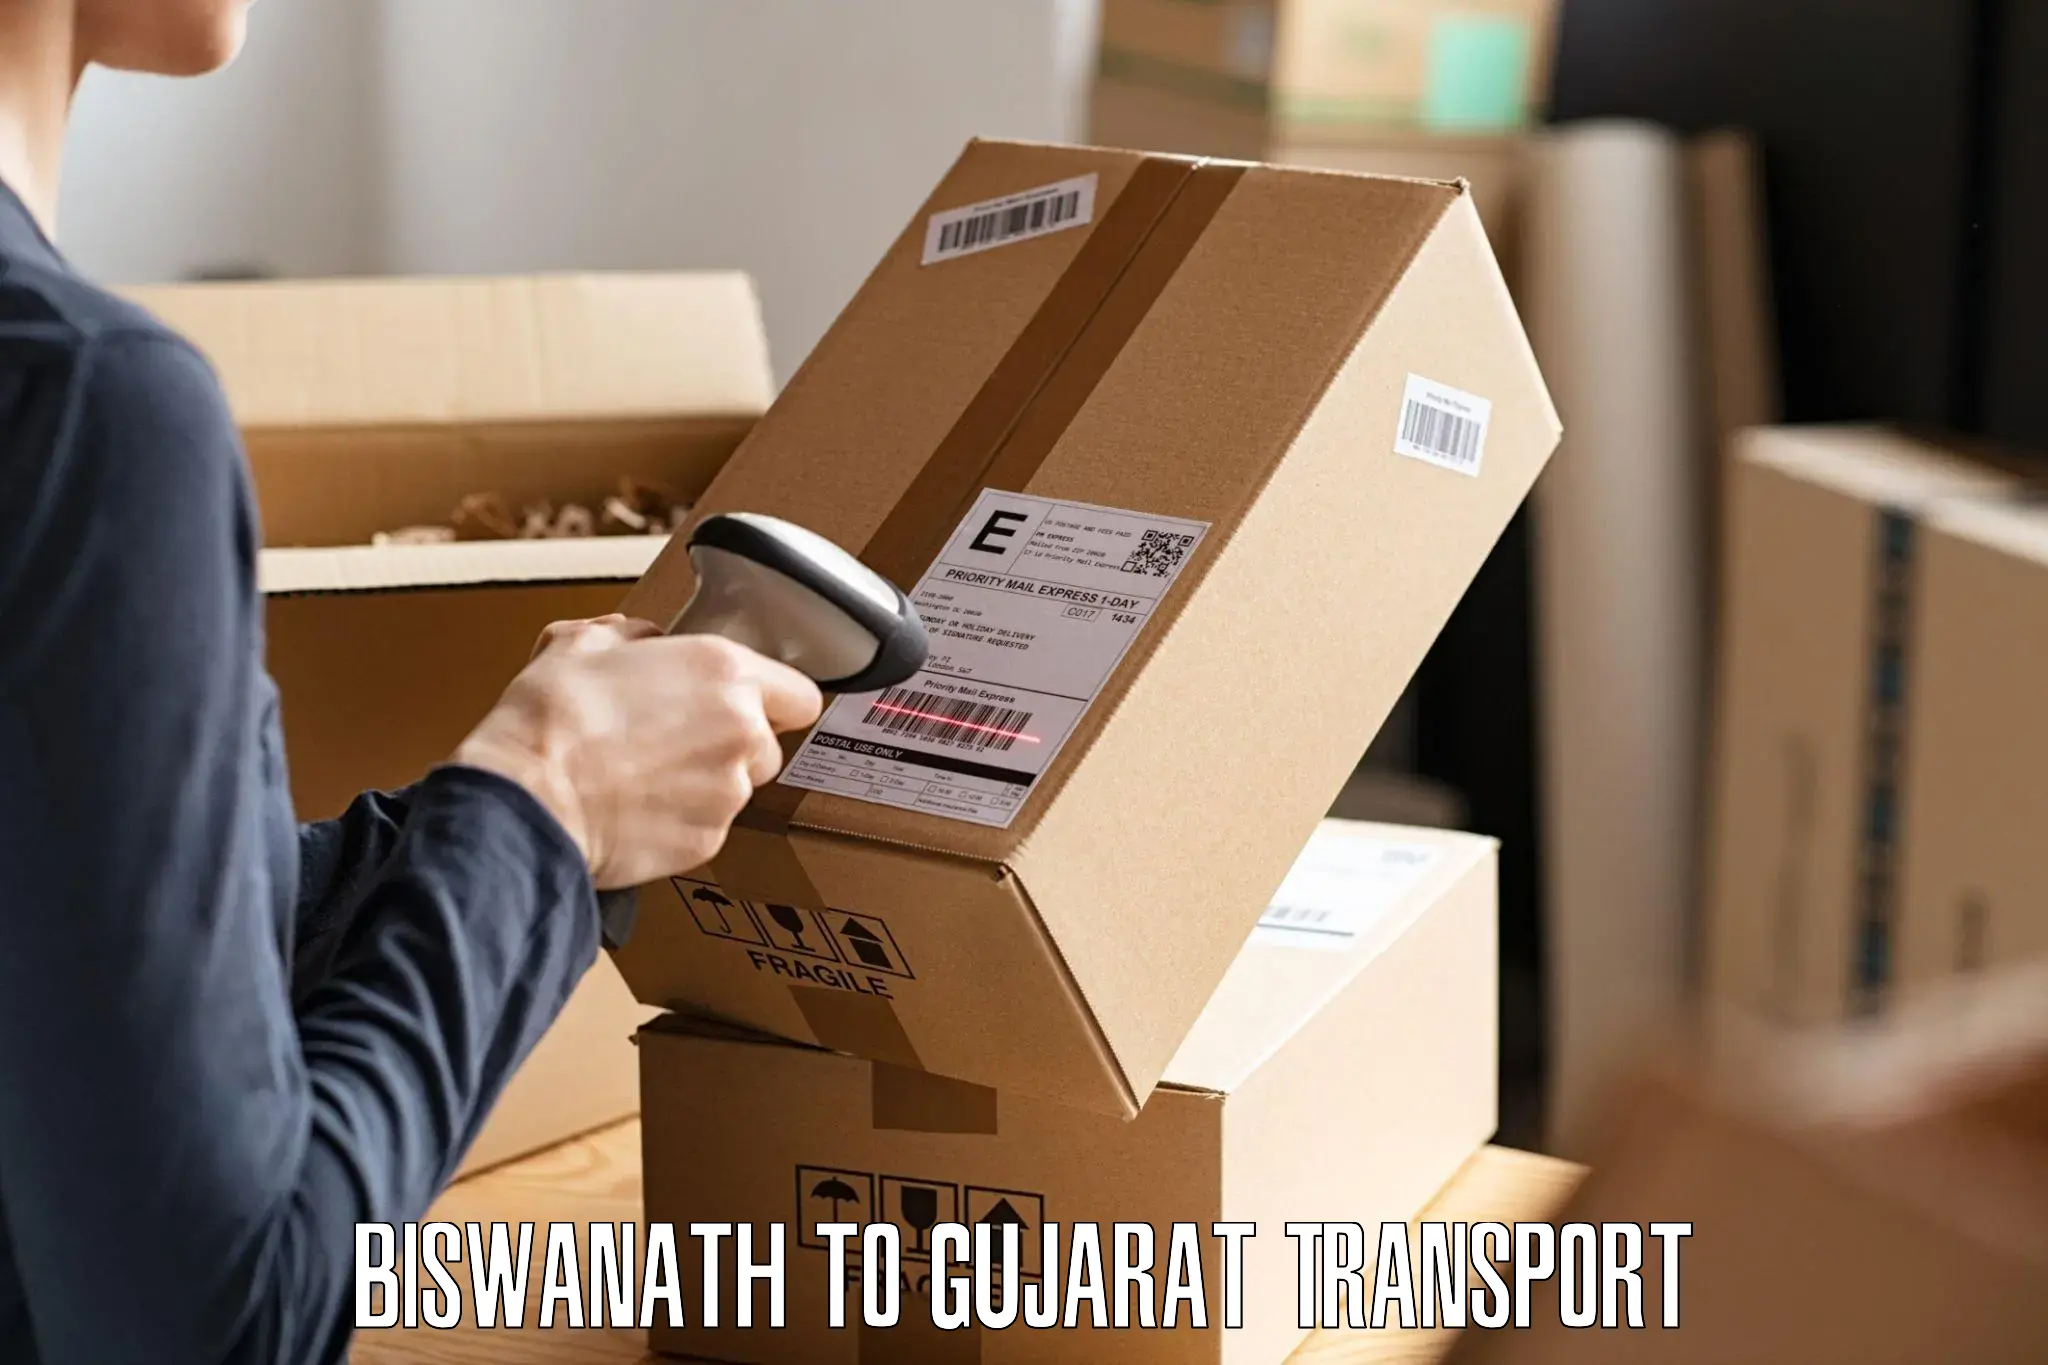 Daily transport service Biswanath to Dang